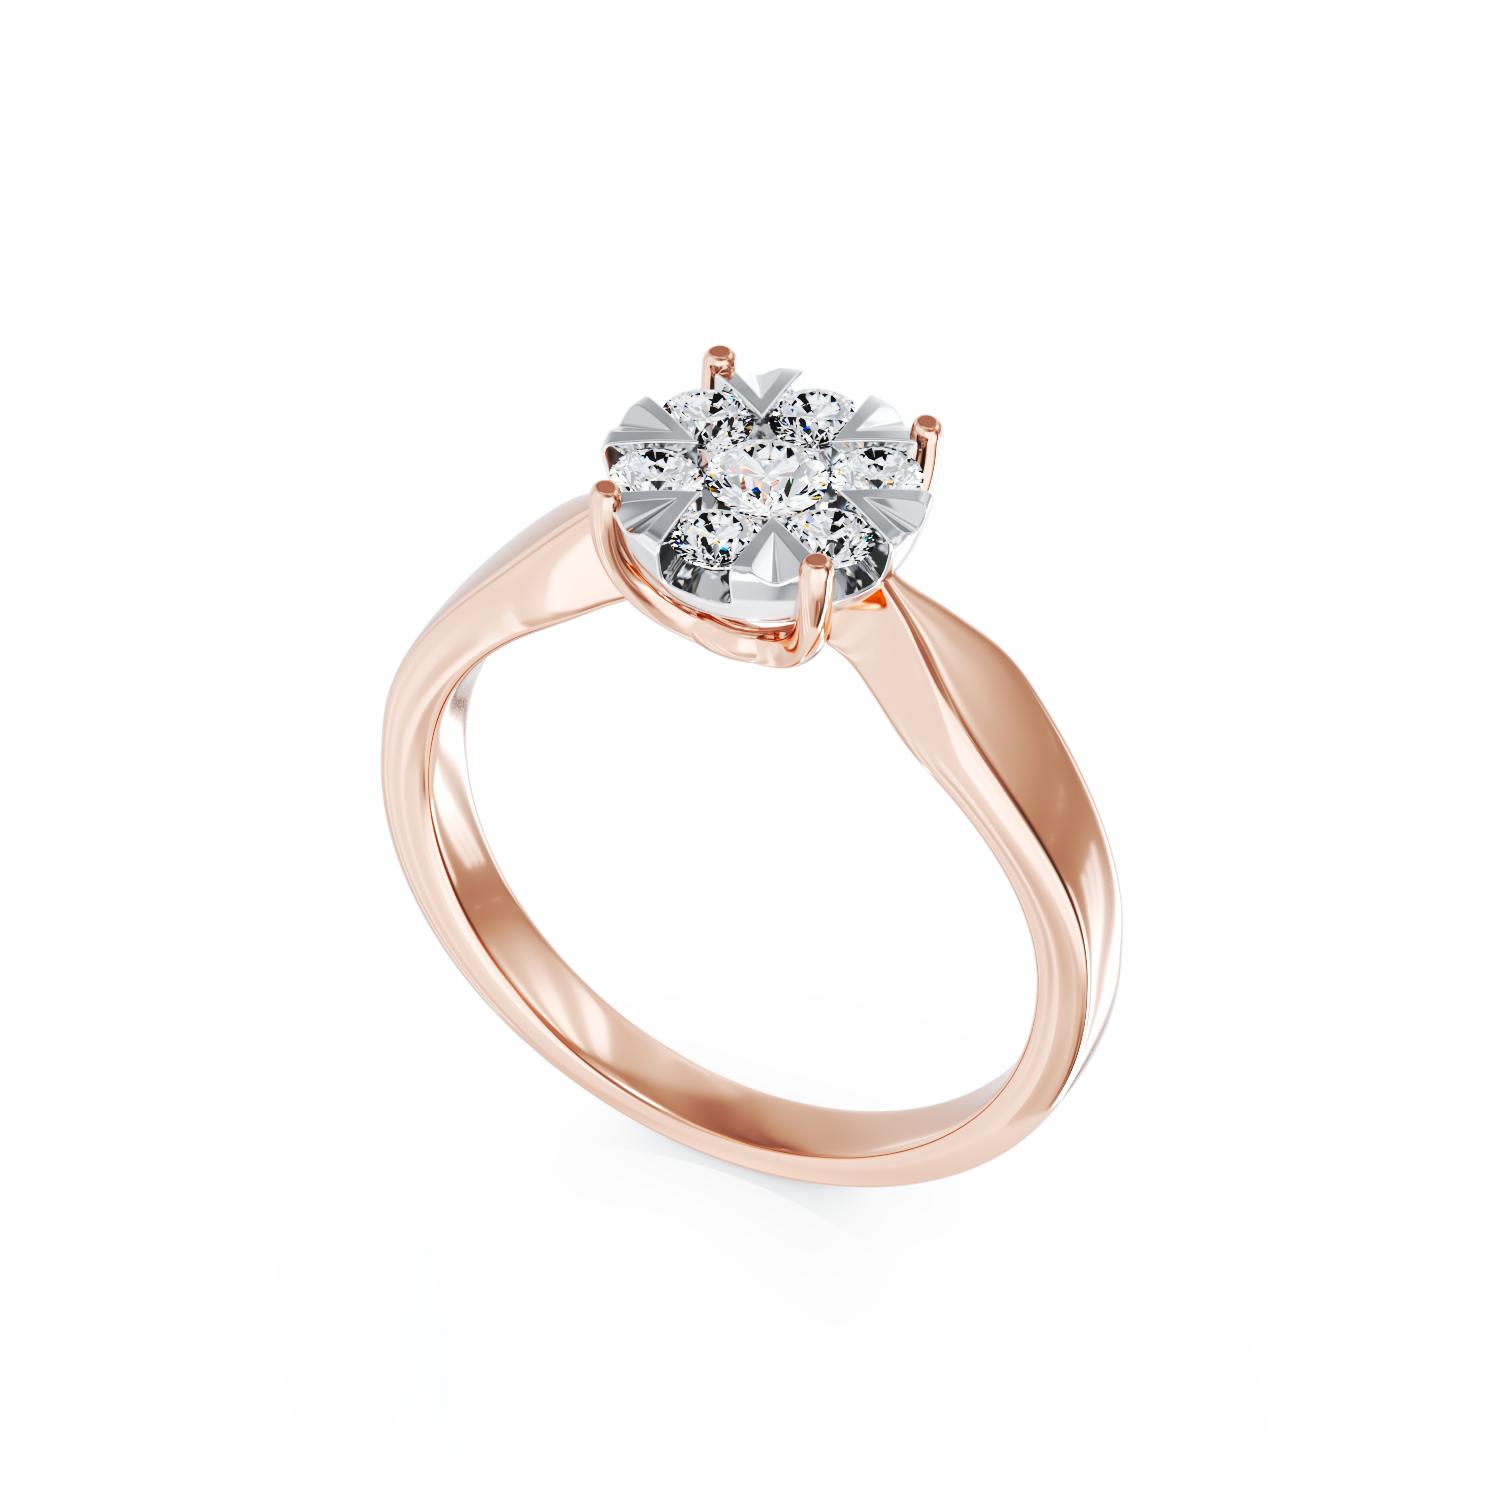 18K rose gold engagement ring with 0.34ct diamonds